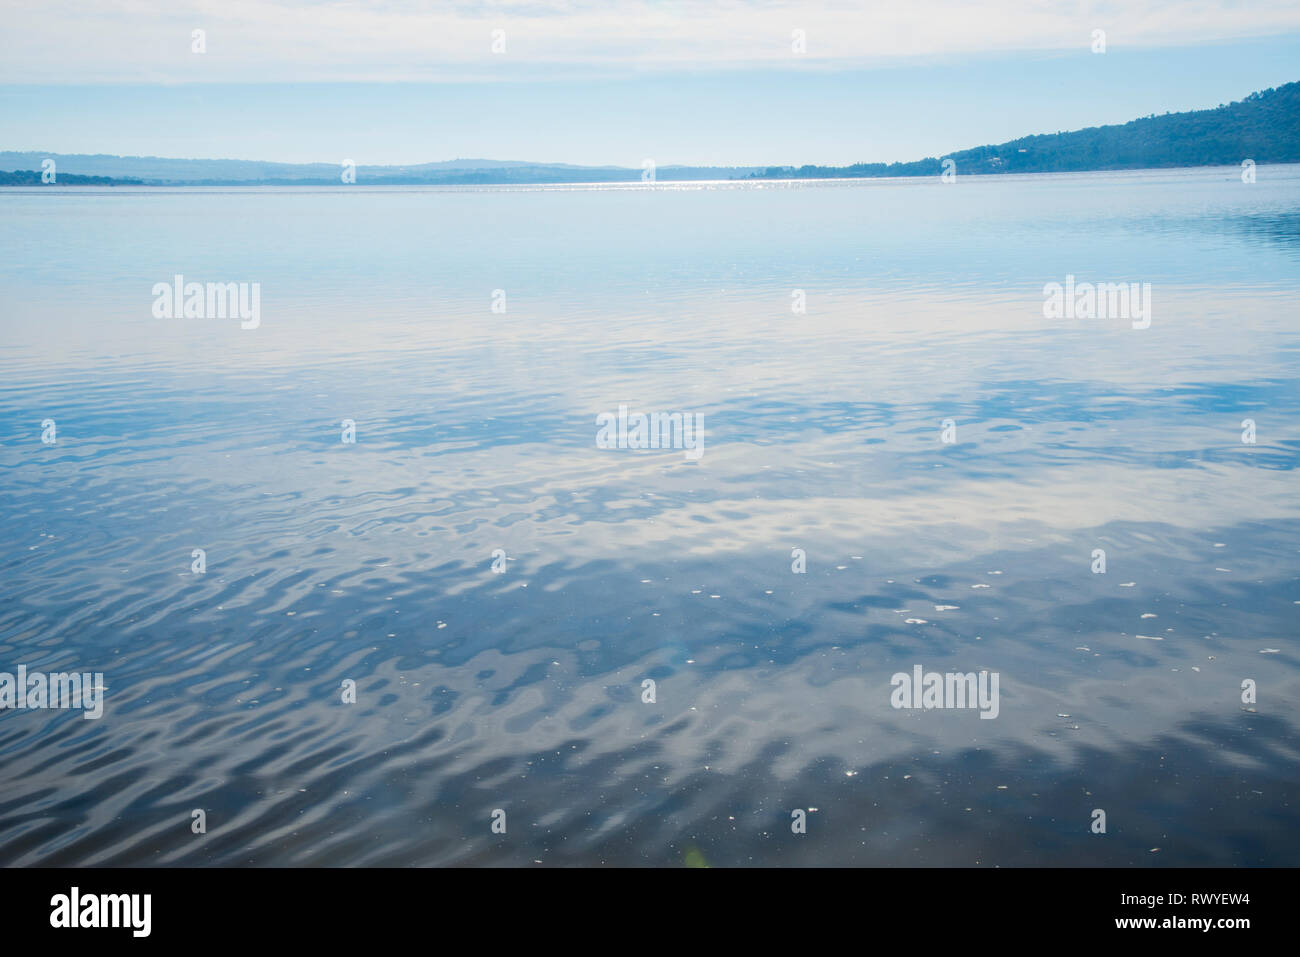 Sky reflected on lake water. Stock Photo